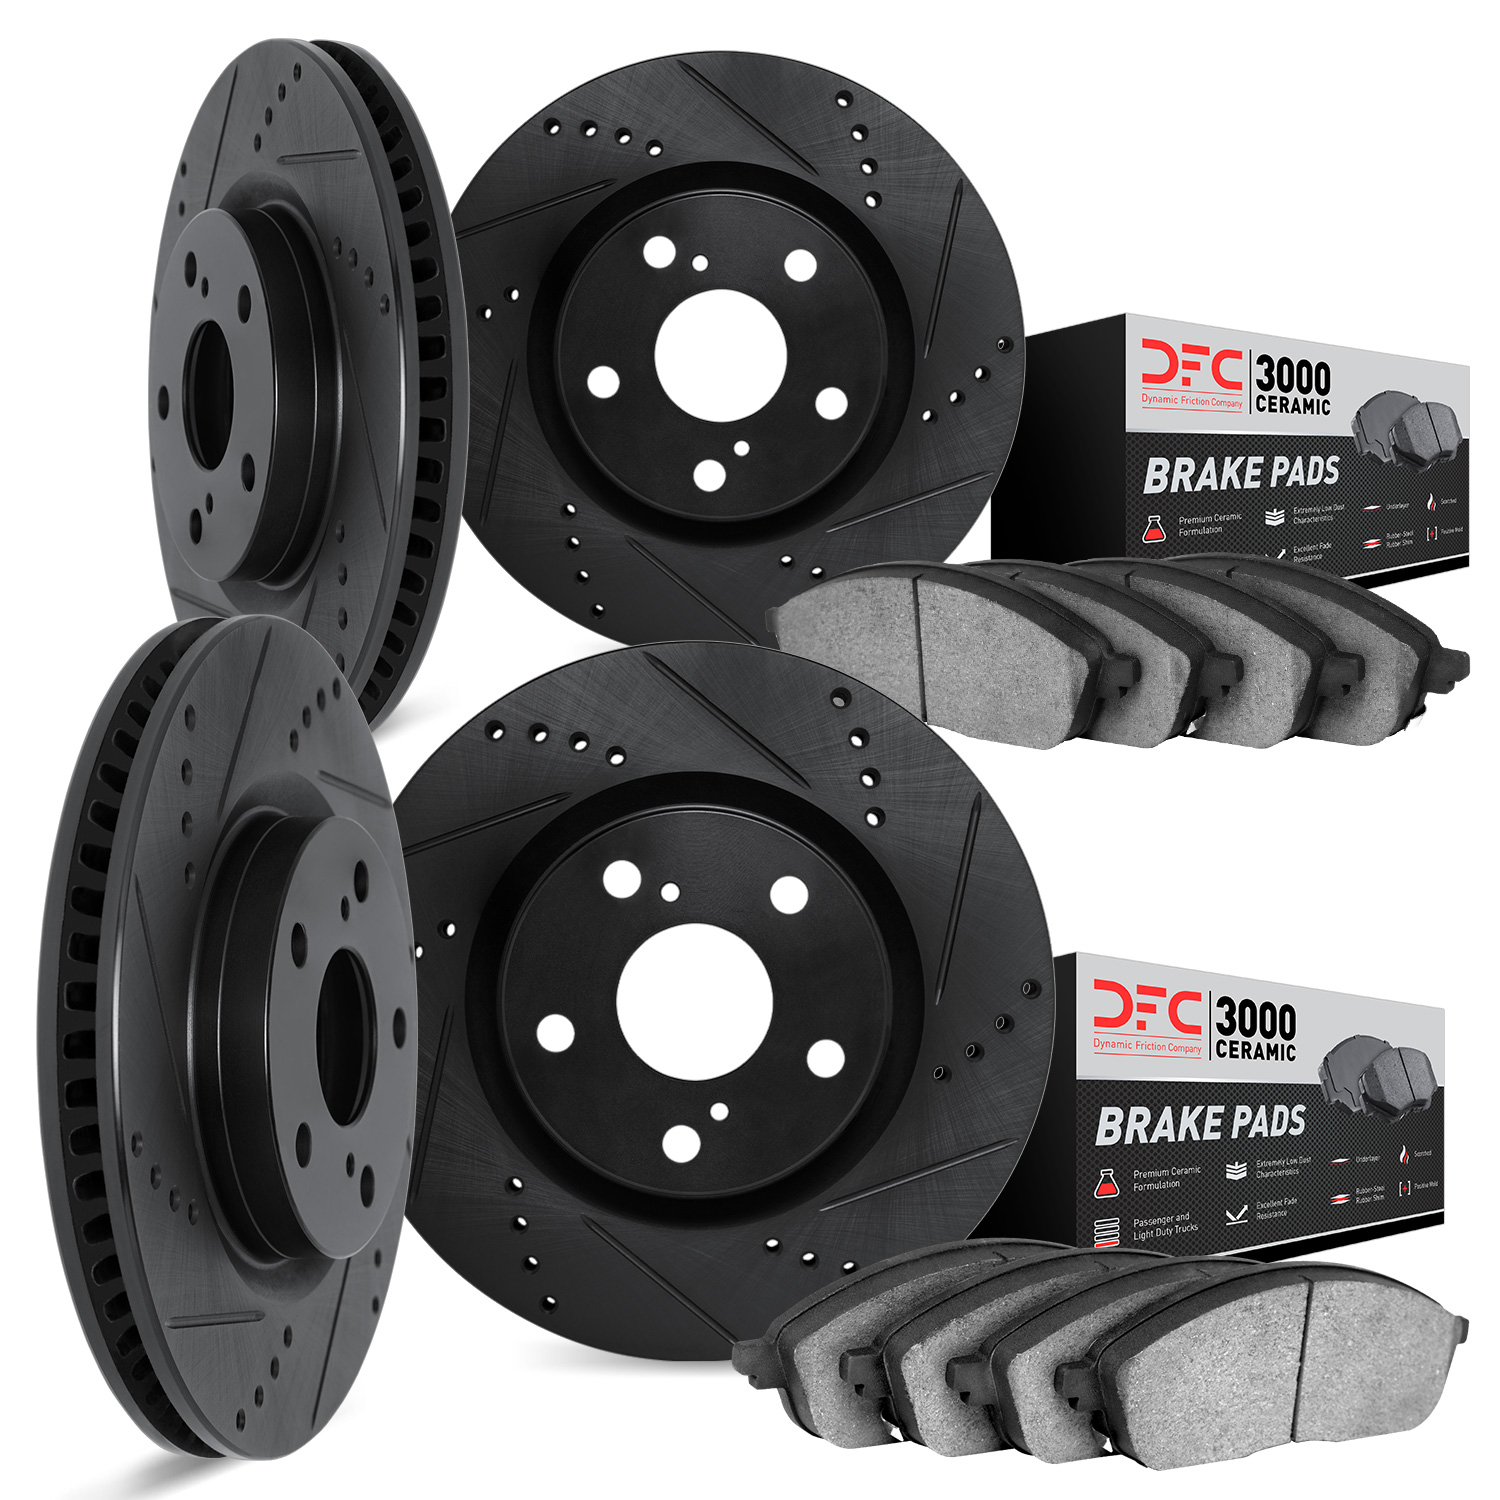 8304-42022 Drilled/Slotted Brake Rotors with 3000-Series Ceramic Brake Pads Kit [Black], Fits Select Mopar, Position: Front and